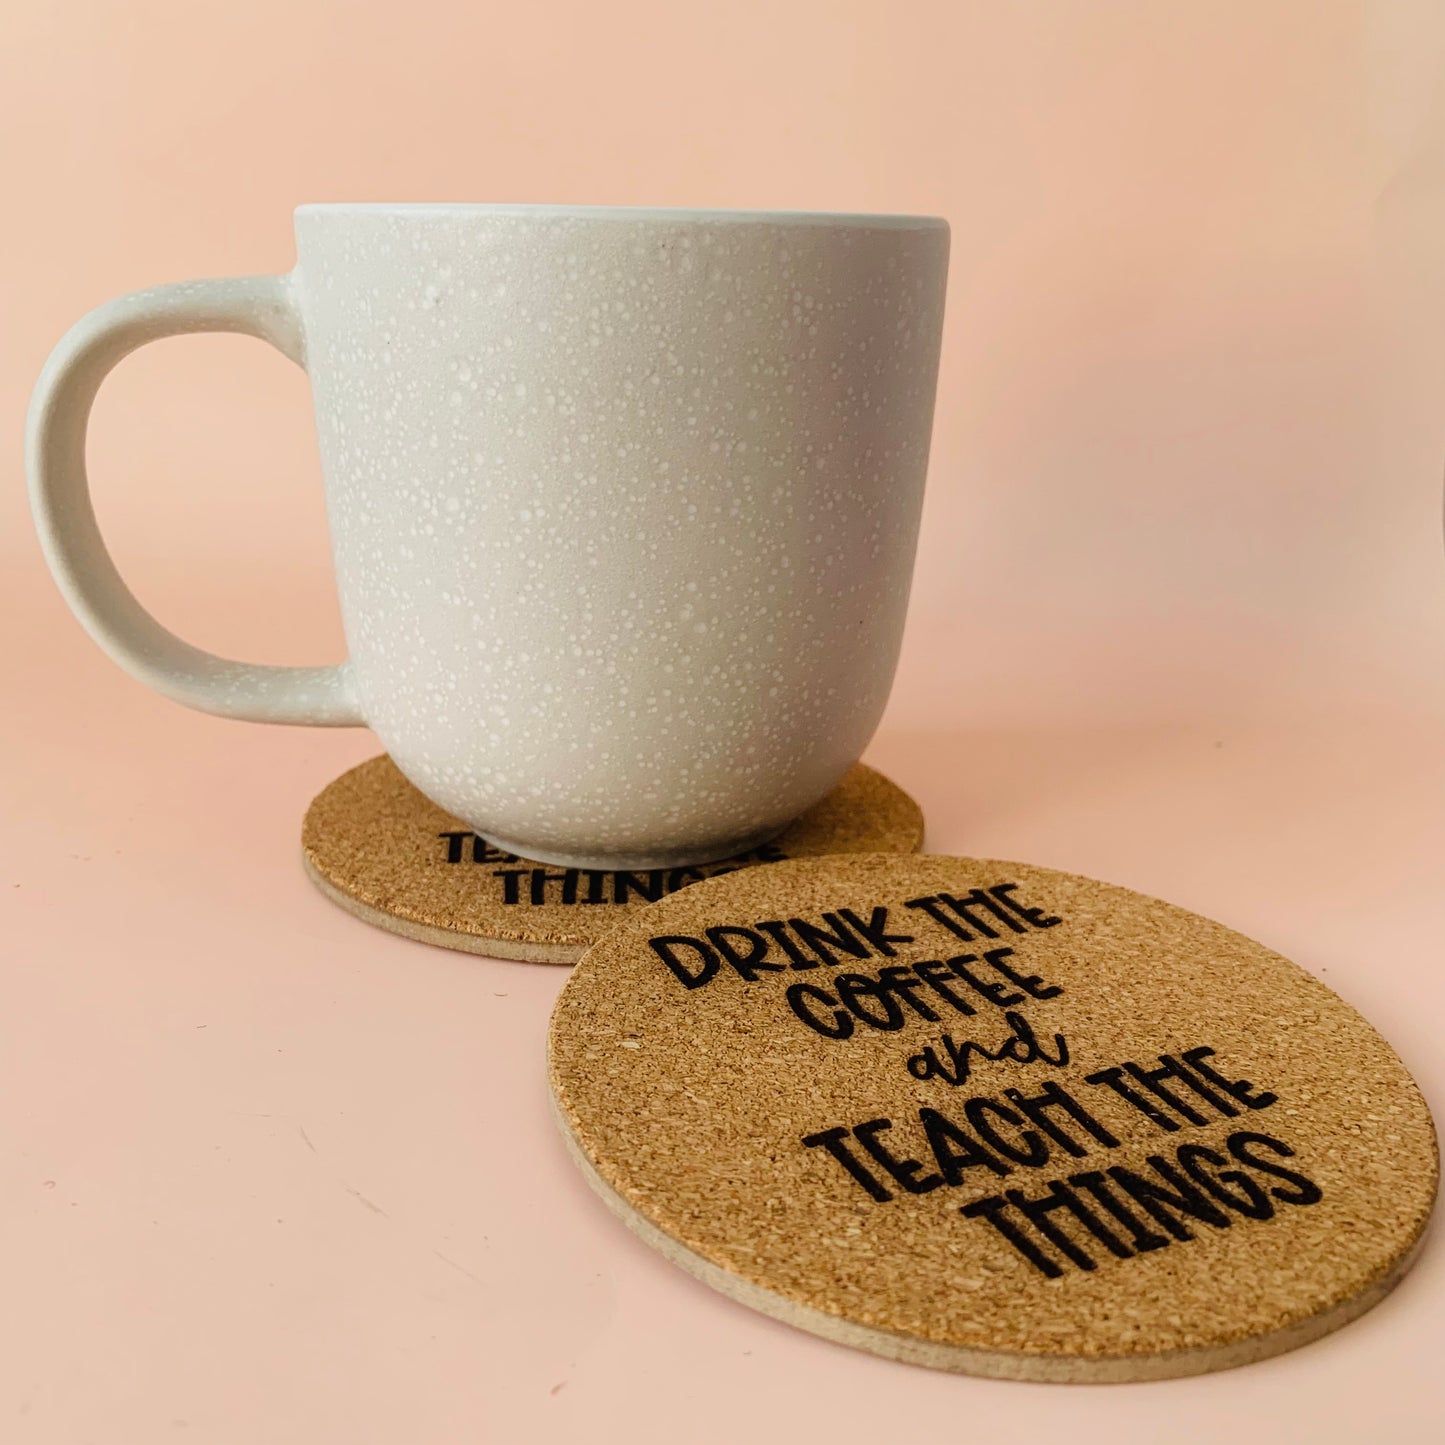 Drink the Coffee & Teach the Things Cork Coaster